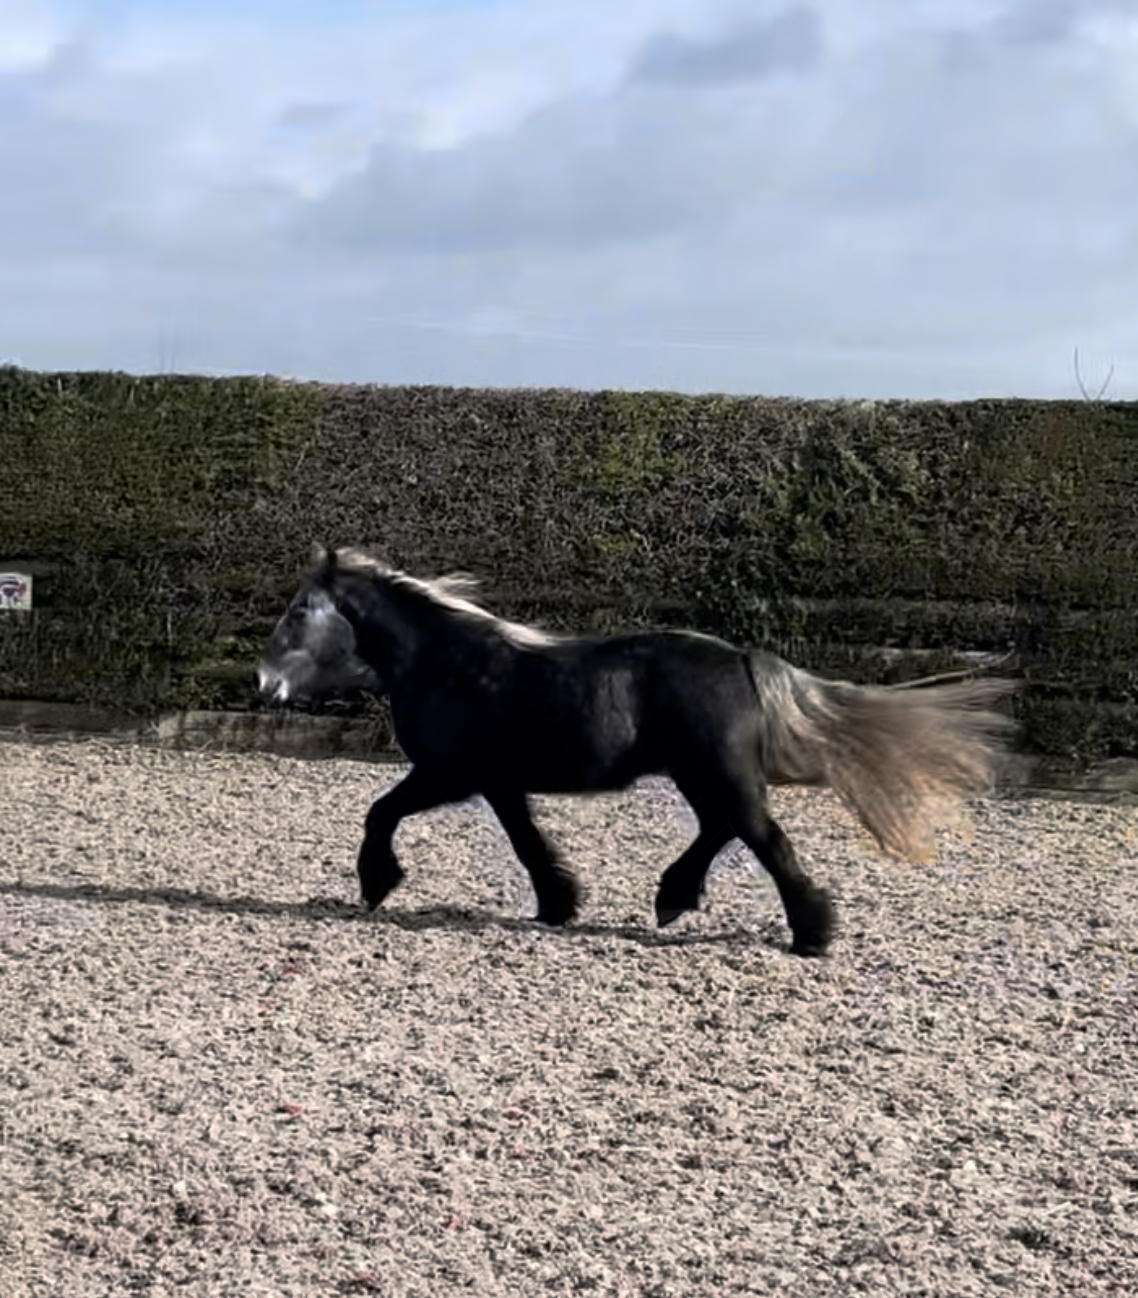 grey pony trotting in an arena